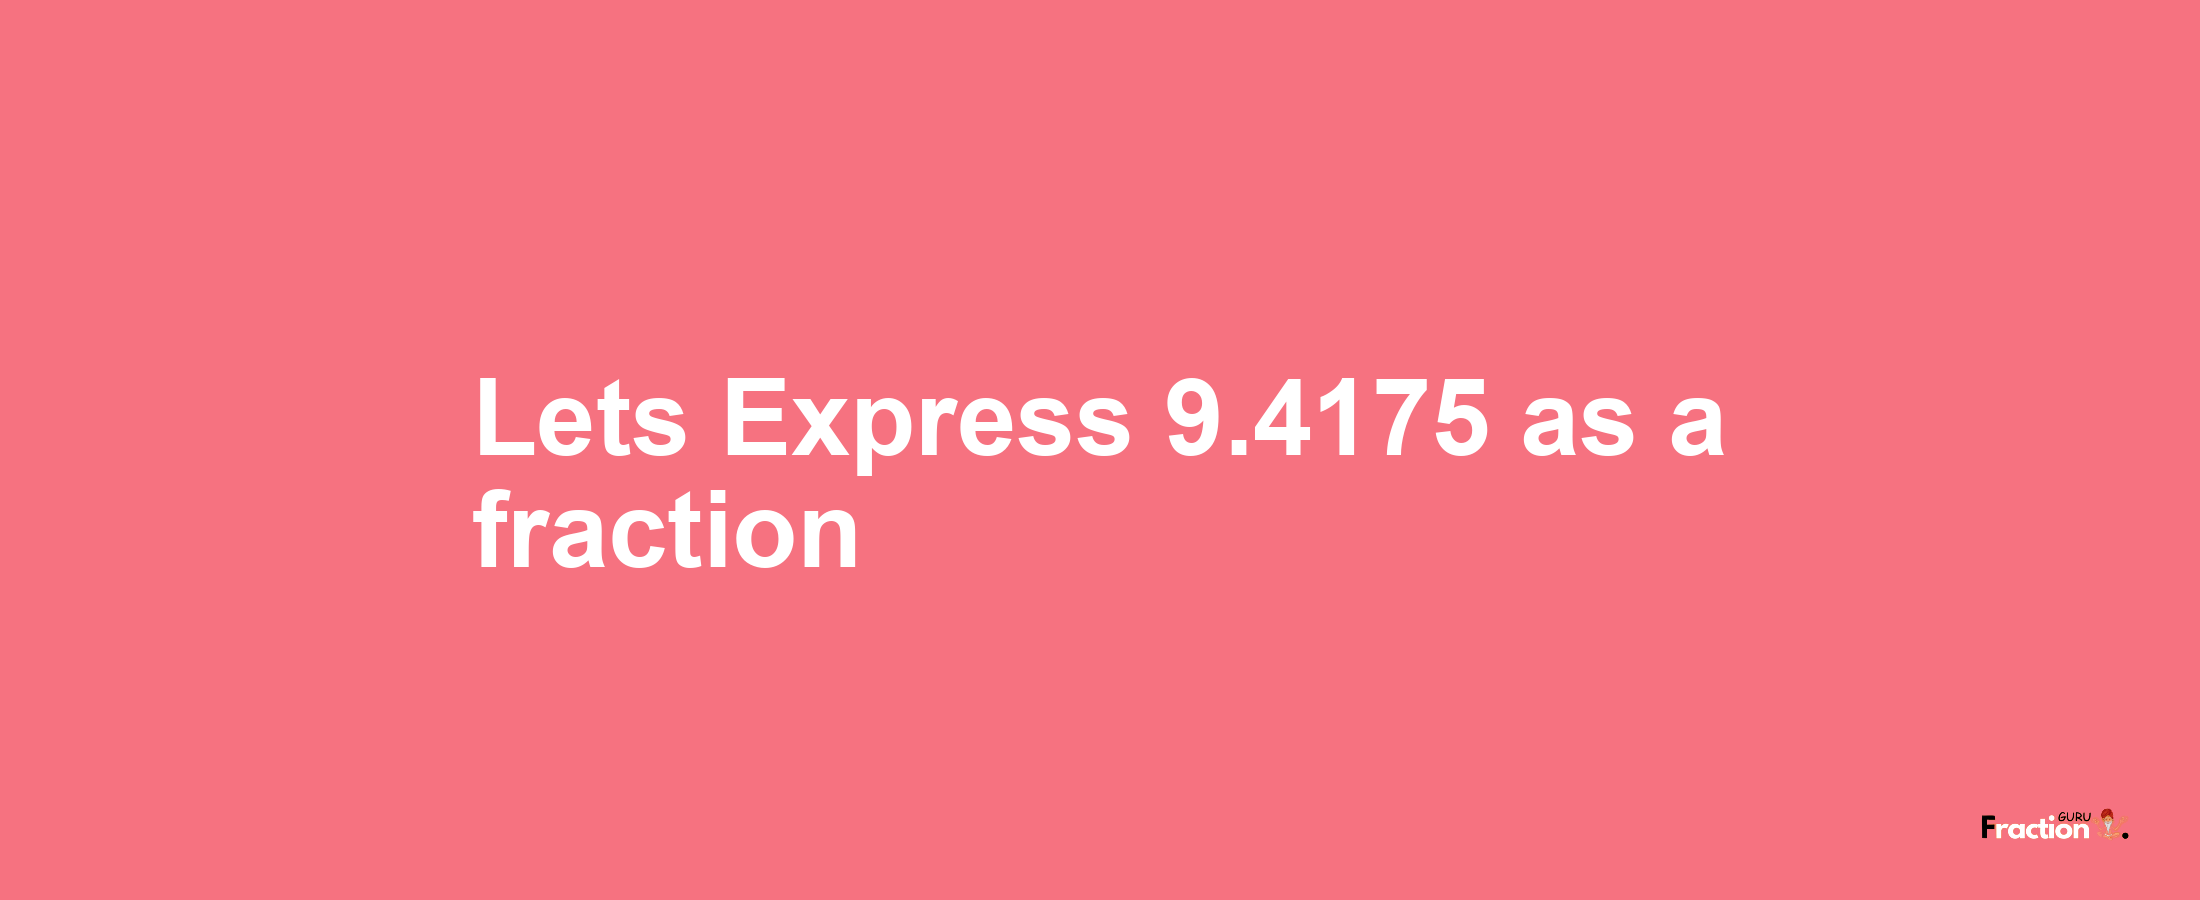 Lets Express 9.4175 as afraction